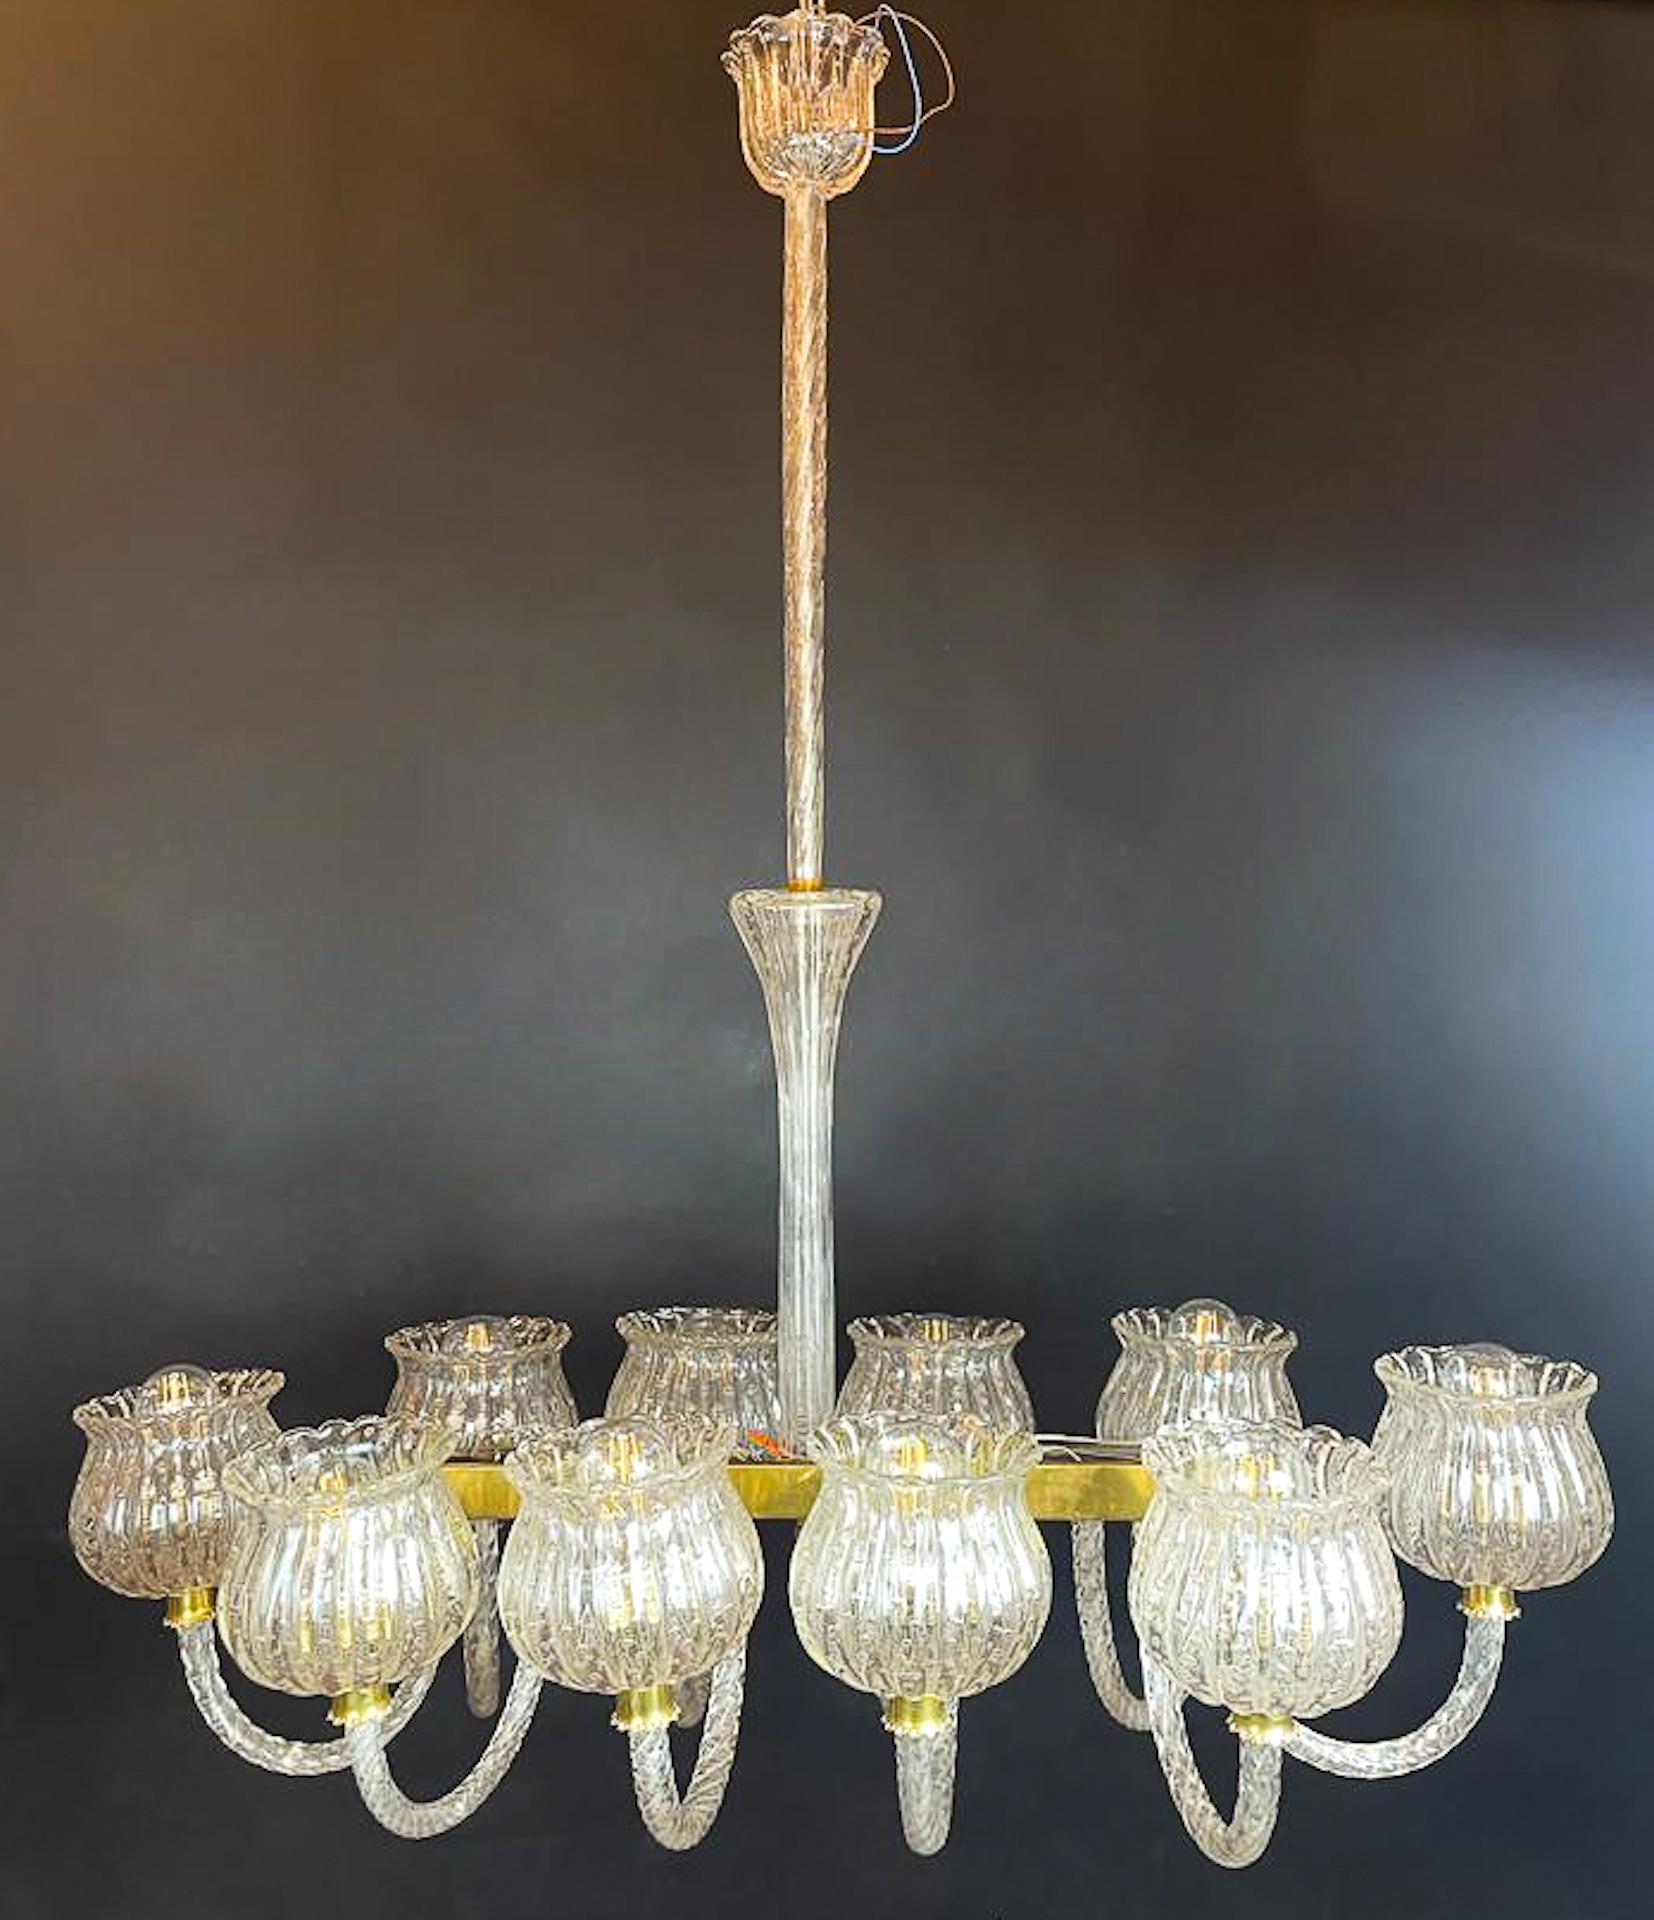 Italian Murano Glass Chandelier, Barovier Style, Italy, 1950s For Sale